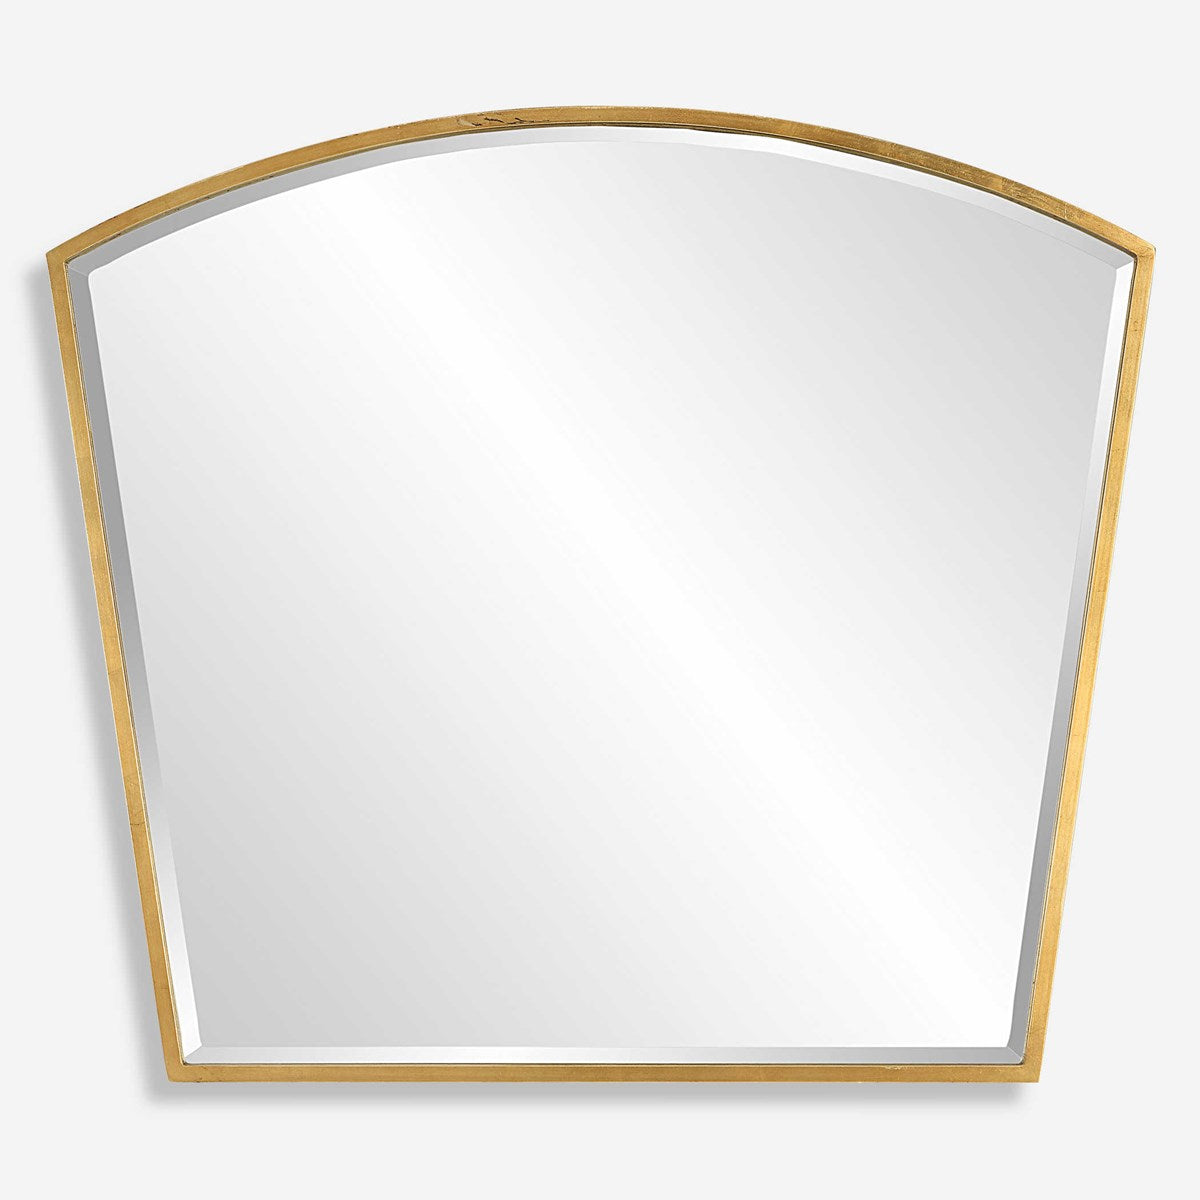 Boundary Arch Mirror - Gold-Uttermost-UTTM-09910-Mirrors-1-France and Son